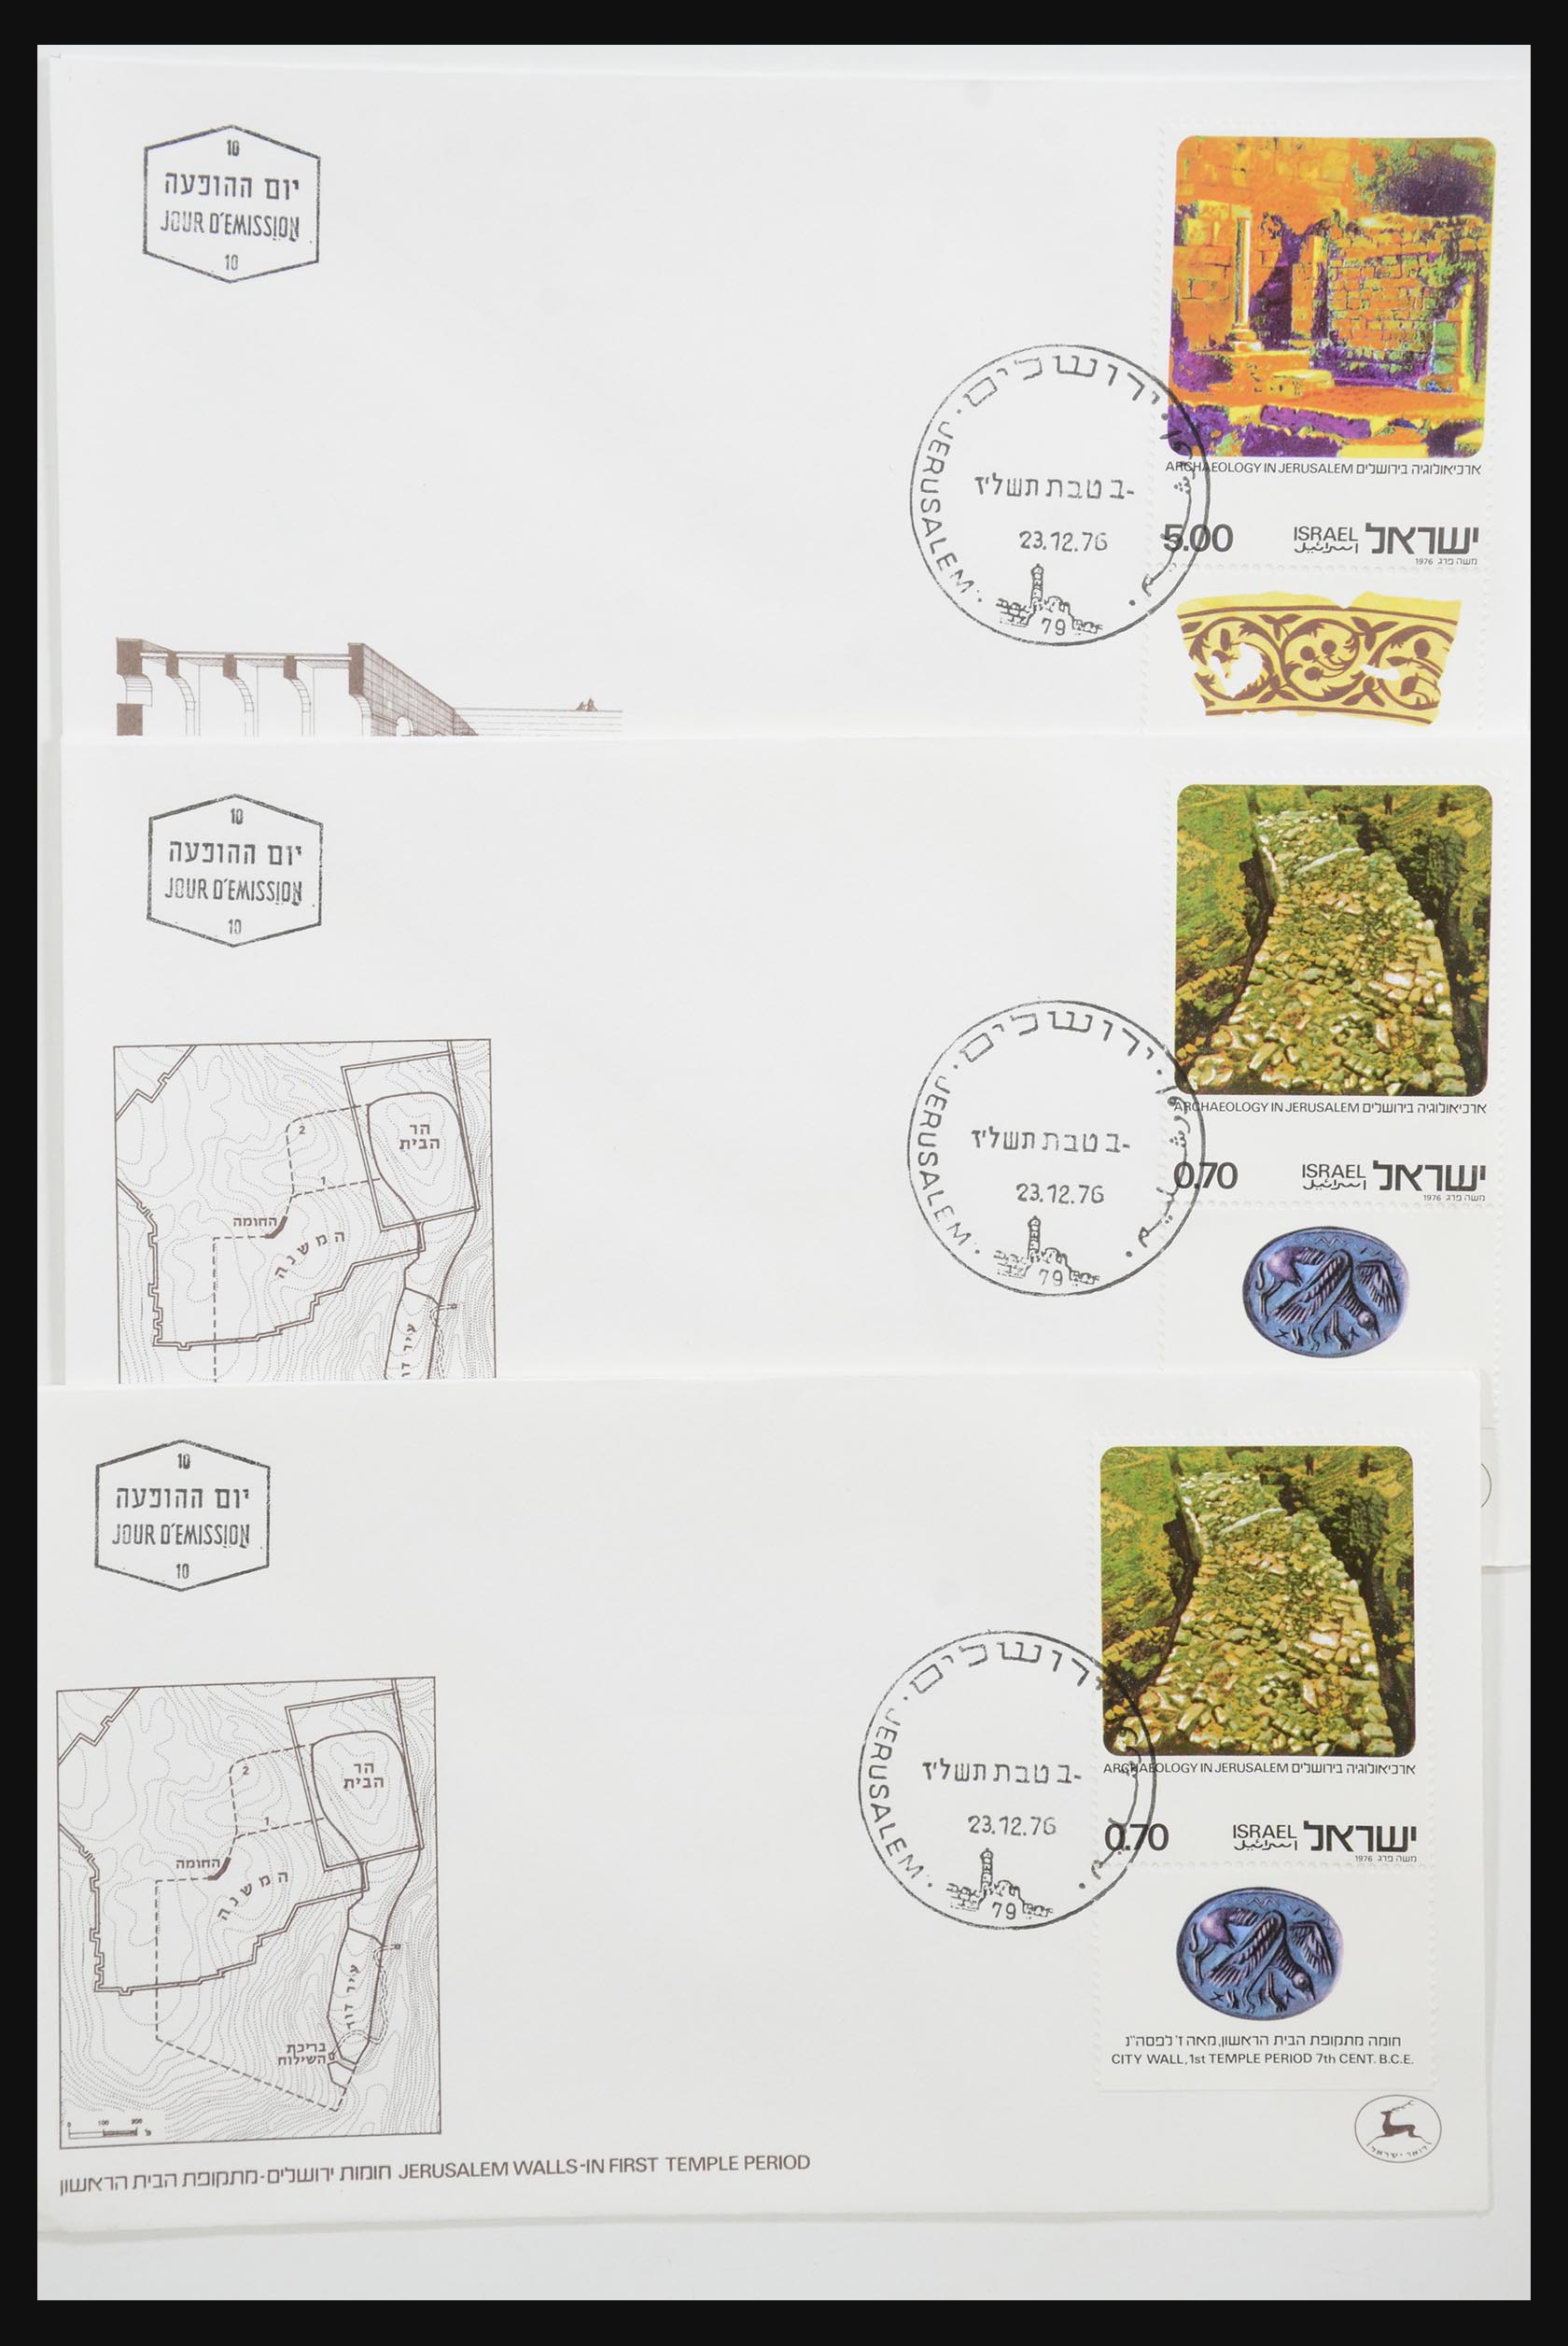 31924 001 - 31924 Israël fdc-collectie 1957-2003.